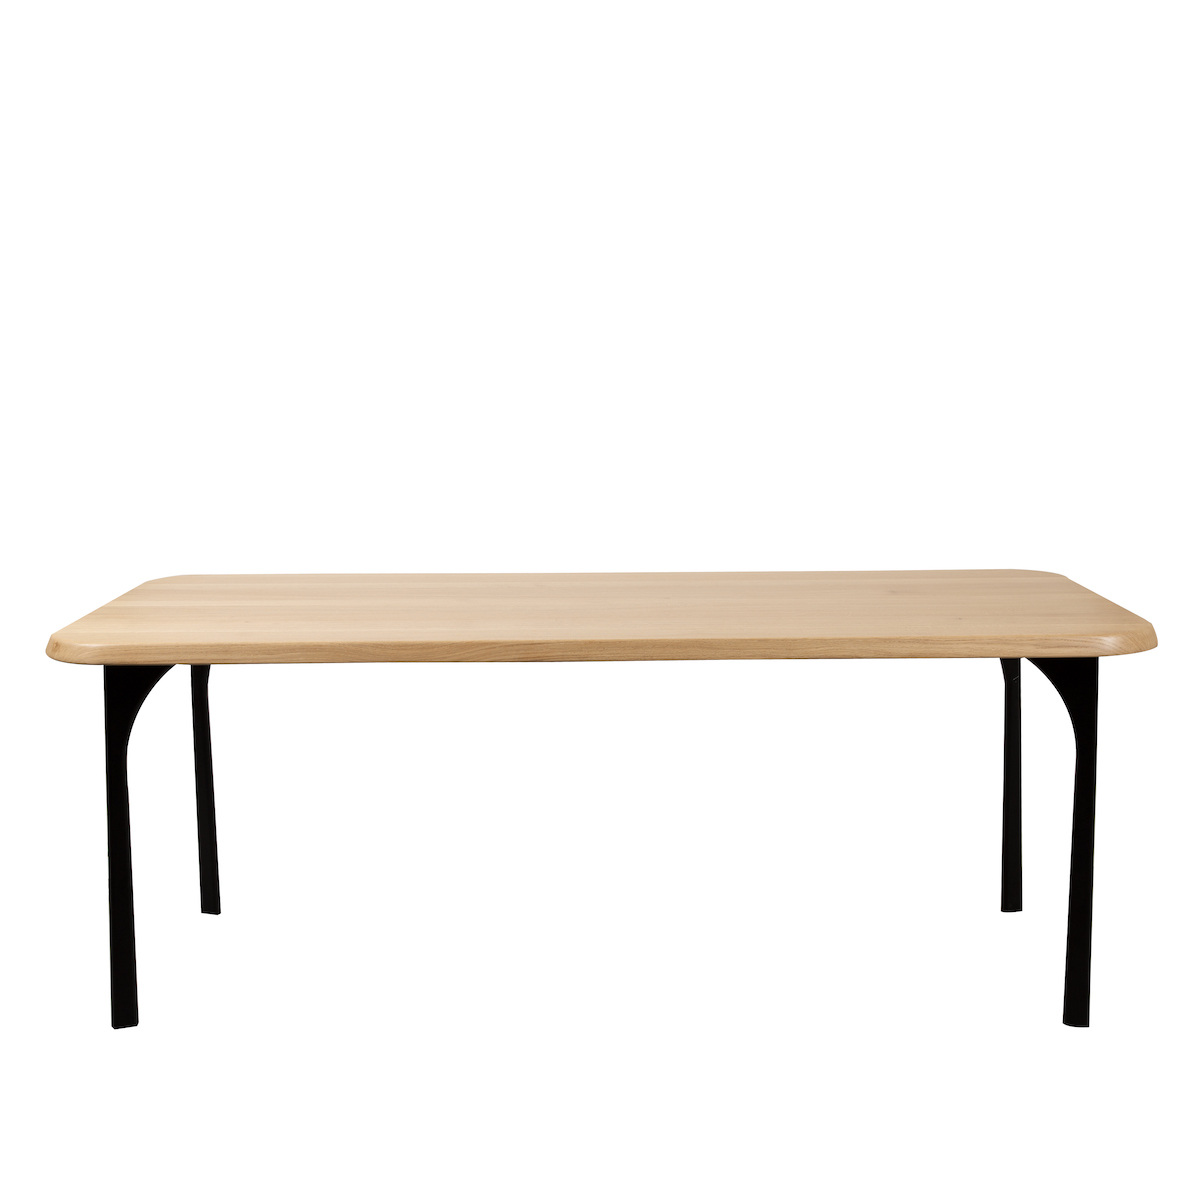 High Table Oasis, Natural / Black - Different sizes - Oak / Metal - image 1